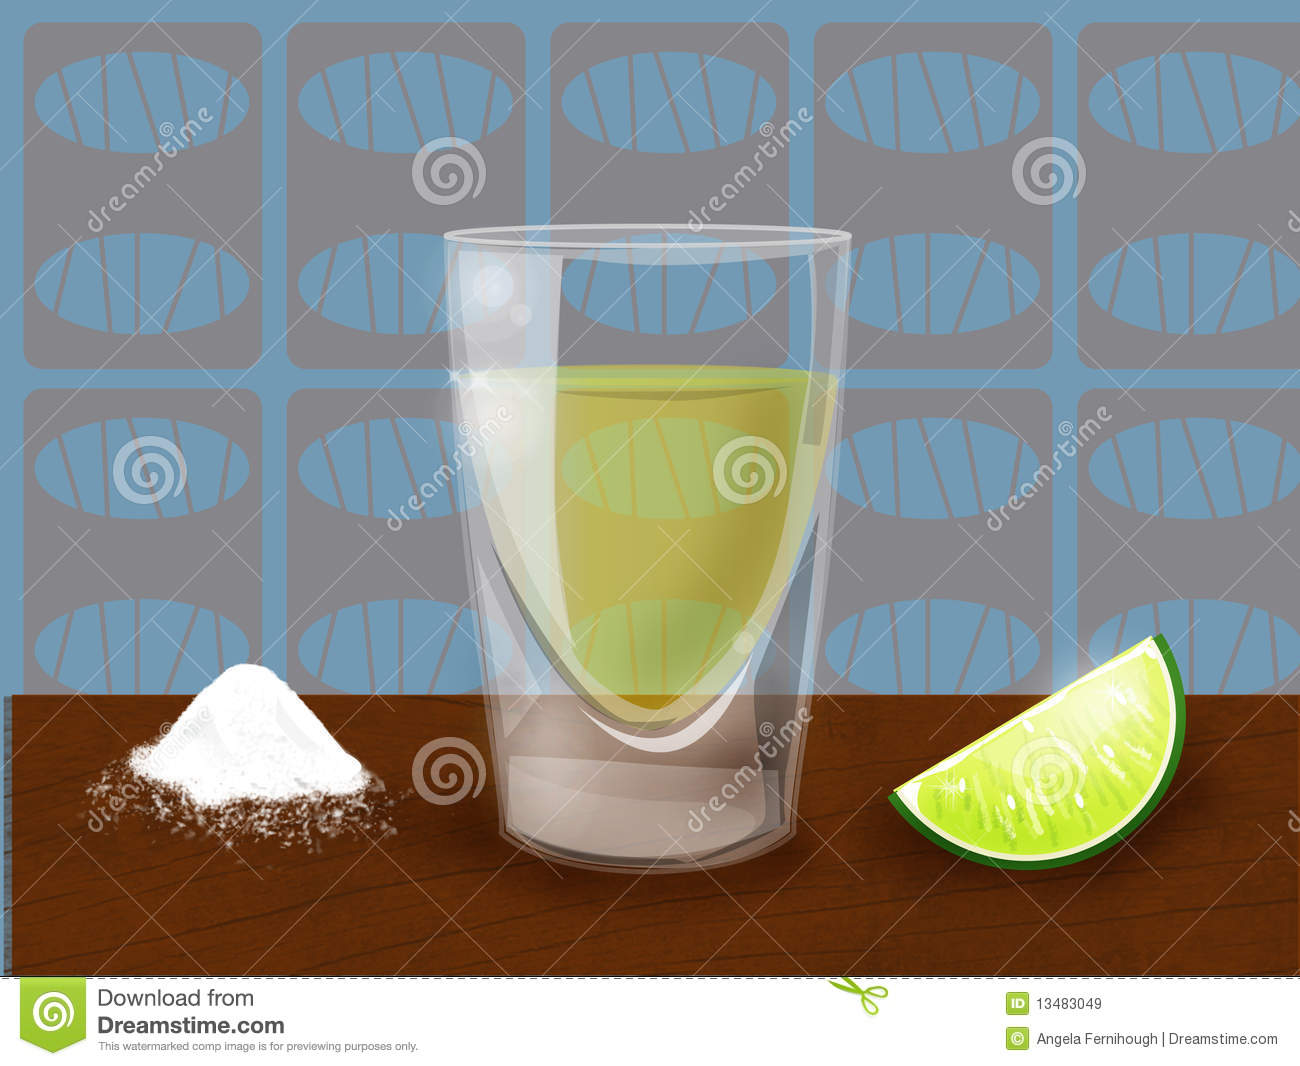 Tequila Slammer Royalty Free Stock Images   Image  13483049